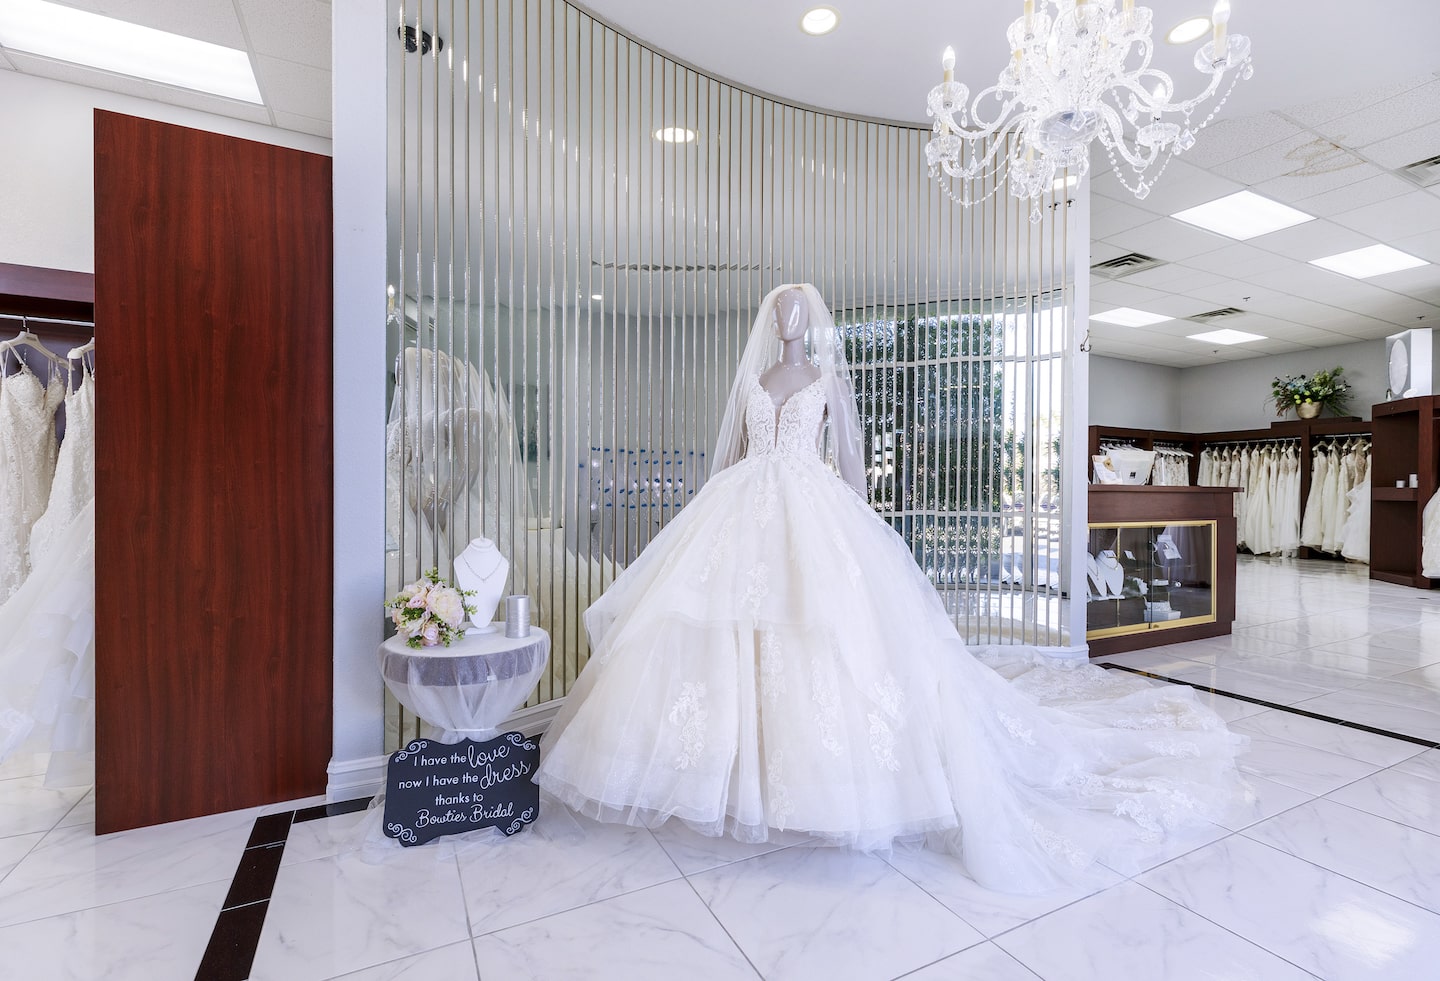 The 8 Best Bridal Boutiques in the Las Vegas Area